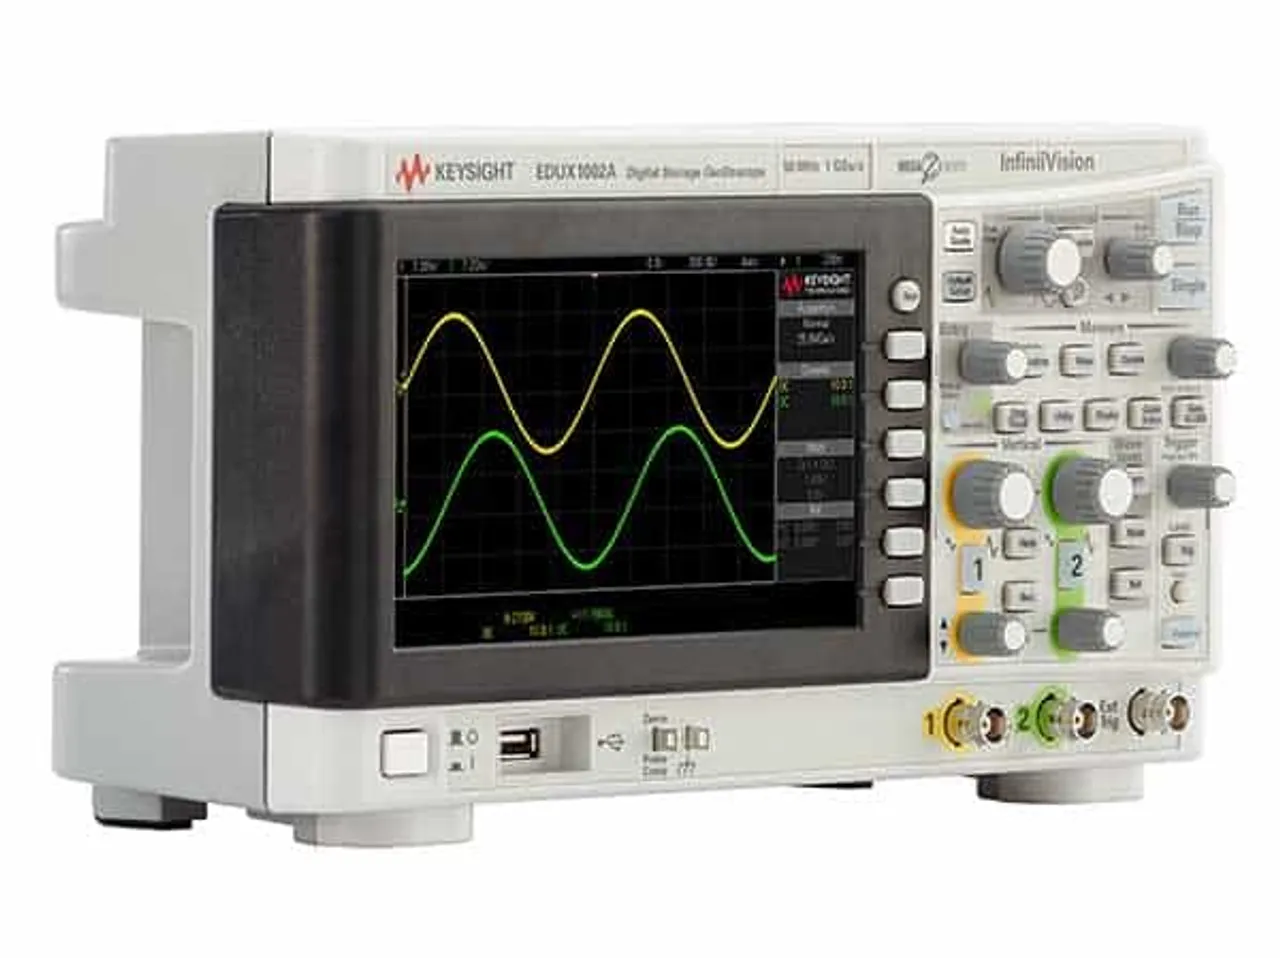 Keysight launches Ultra low cost Oscilloscope series